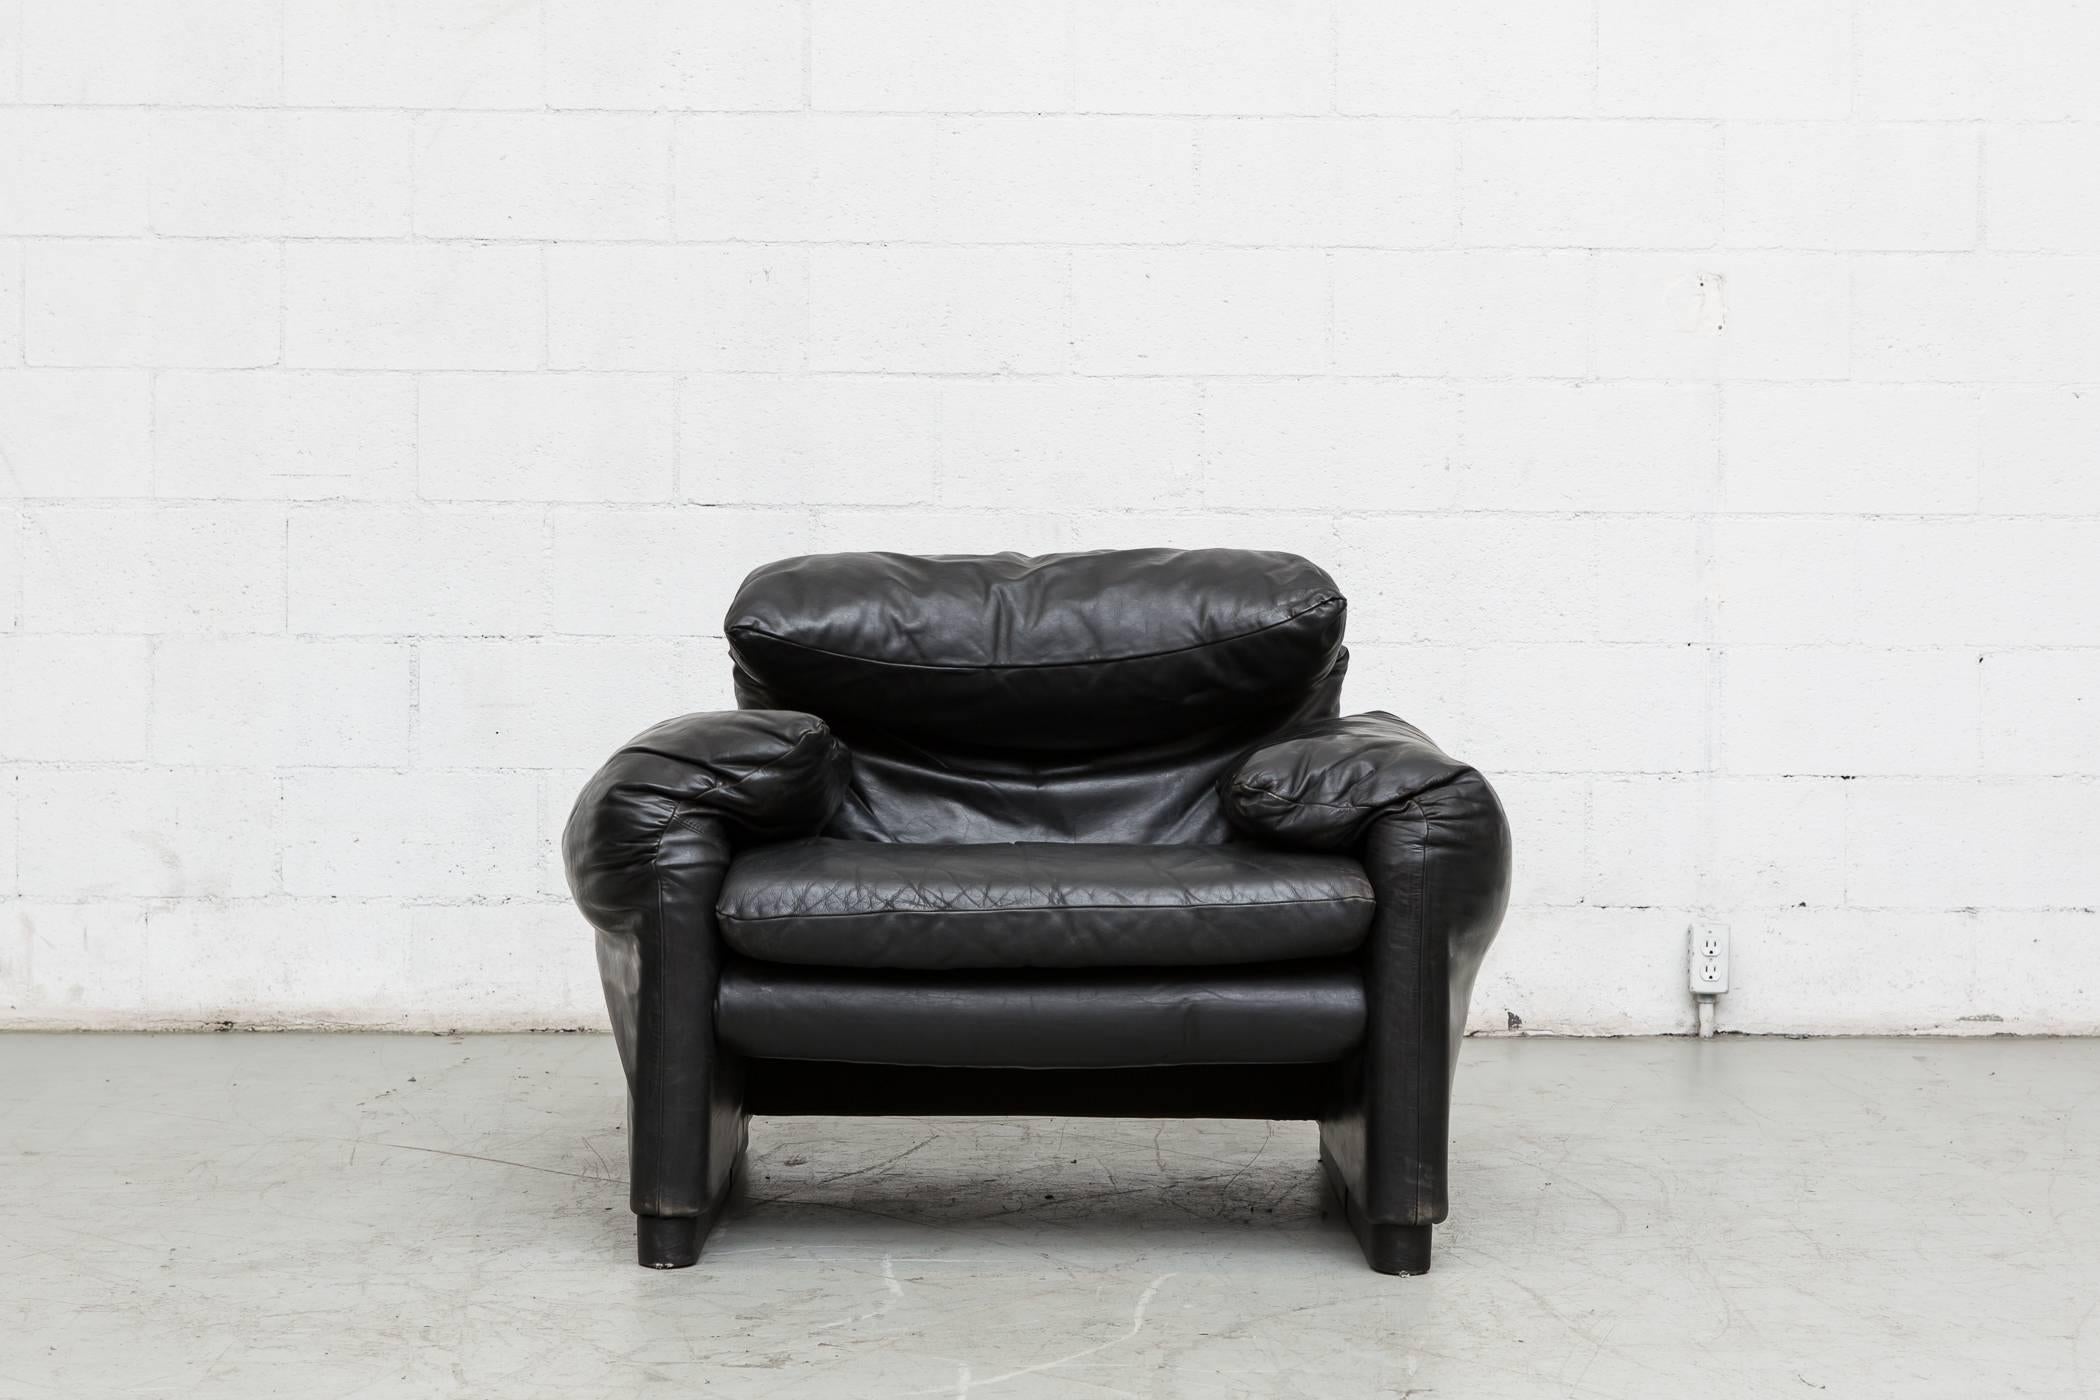 Black leather Vico Magistretti Maralunga lounge chair in good original condition with visible patina.